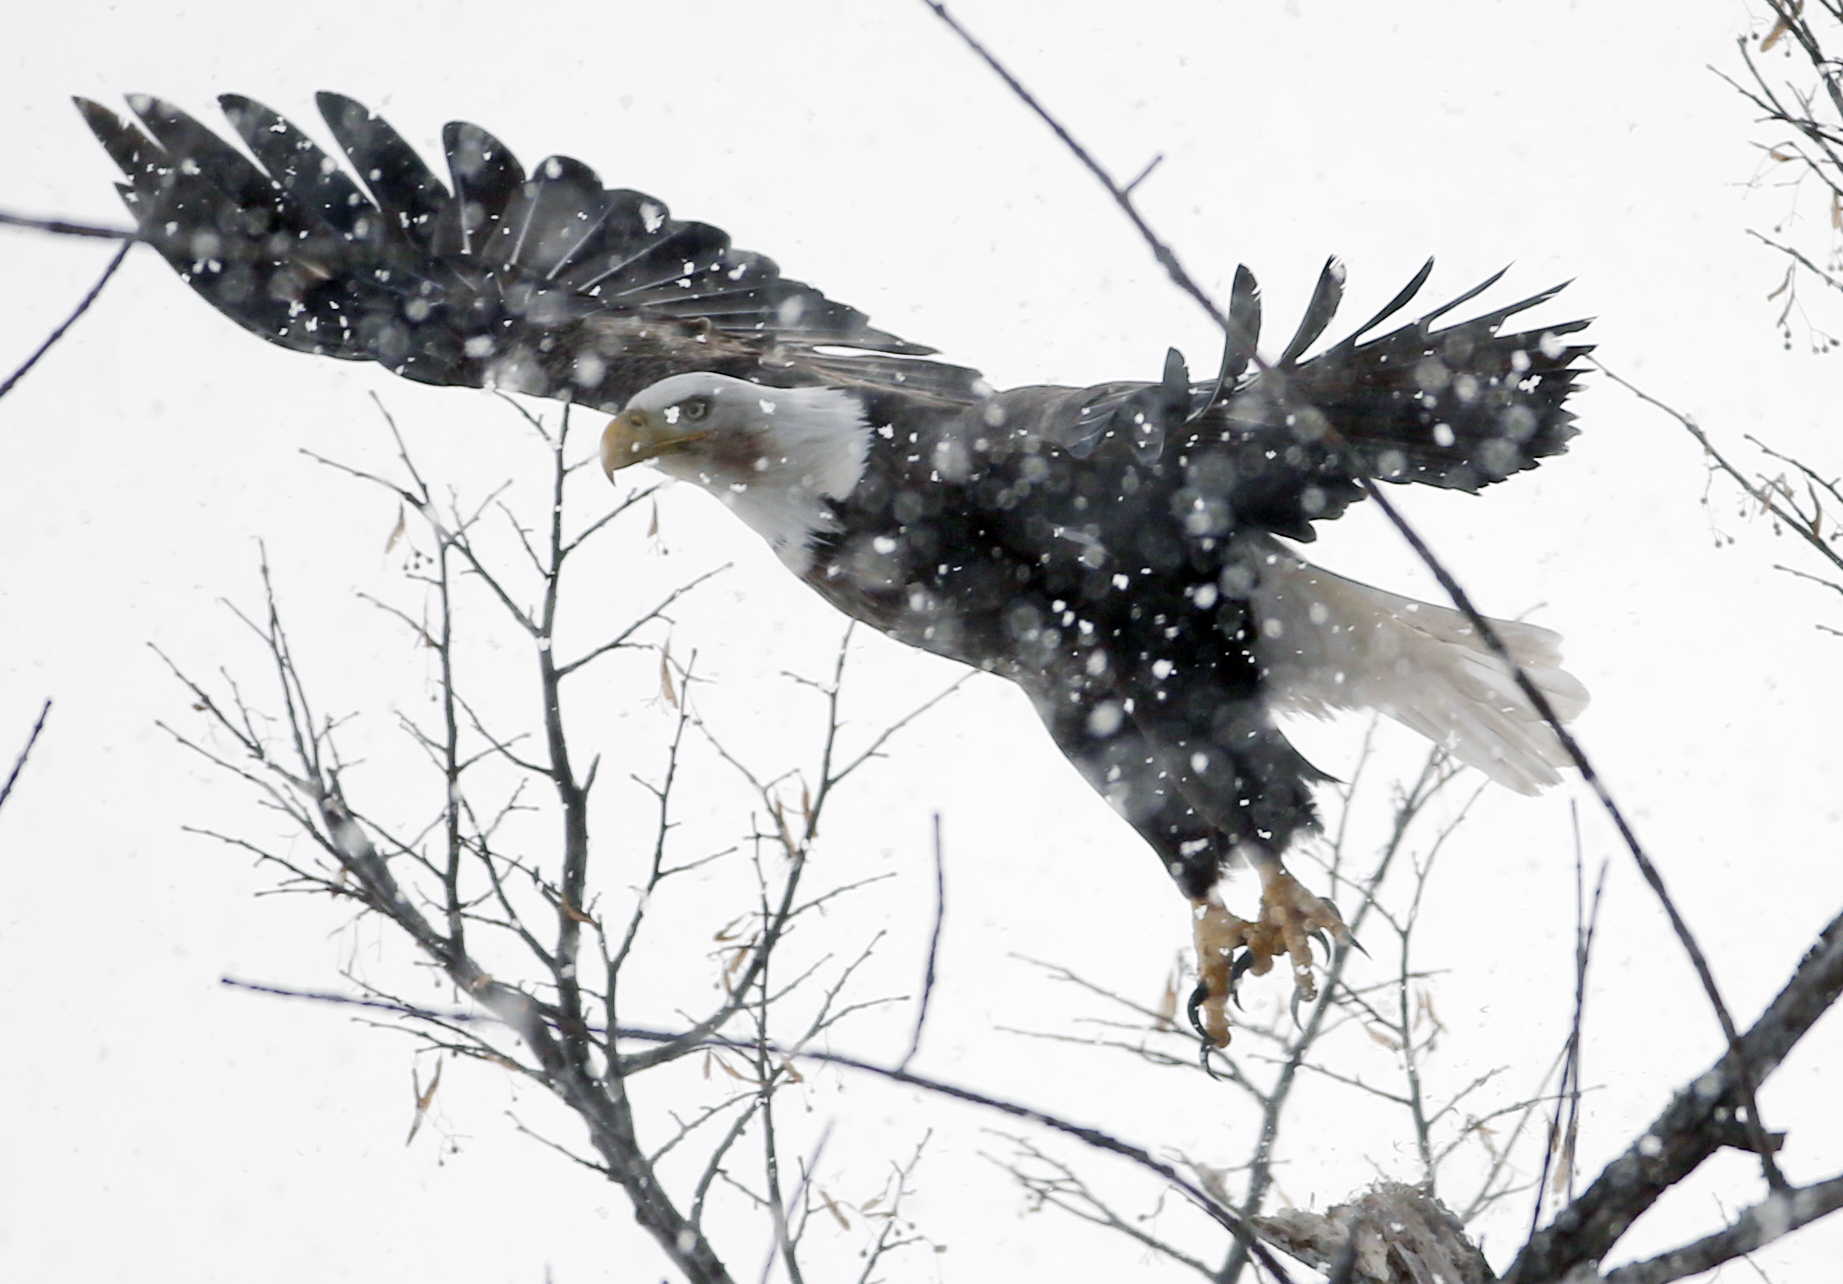 A bald eagle in the snow